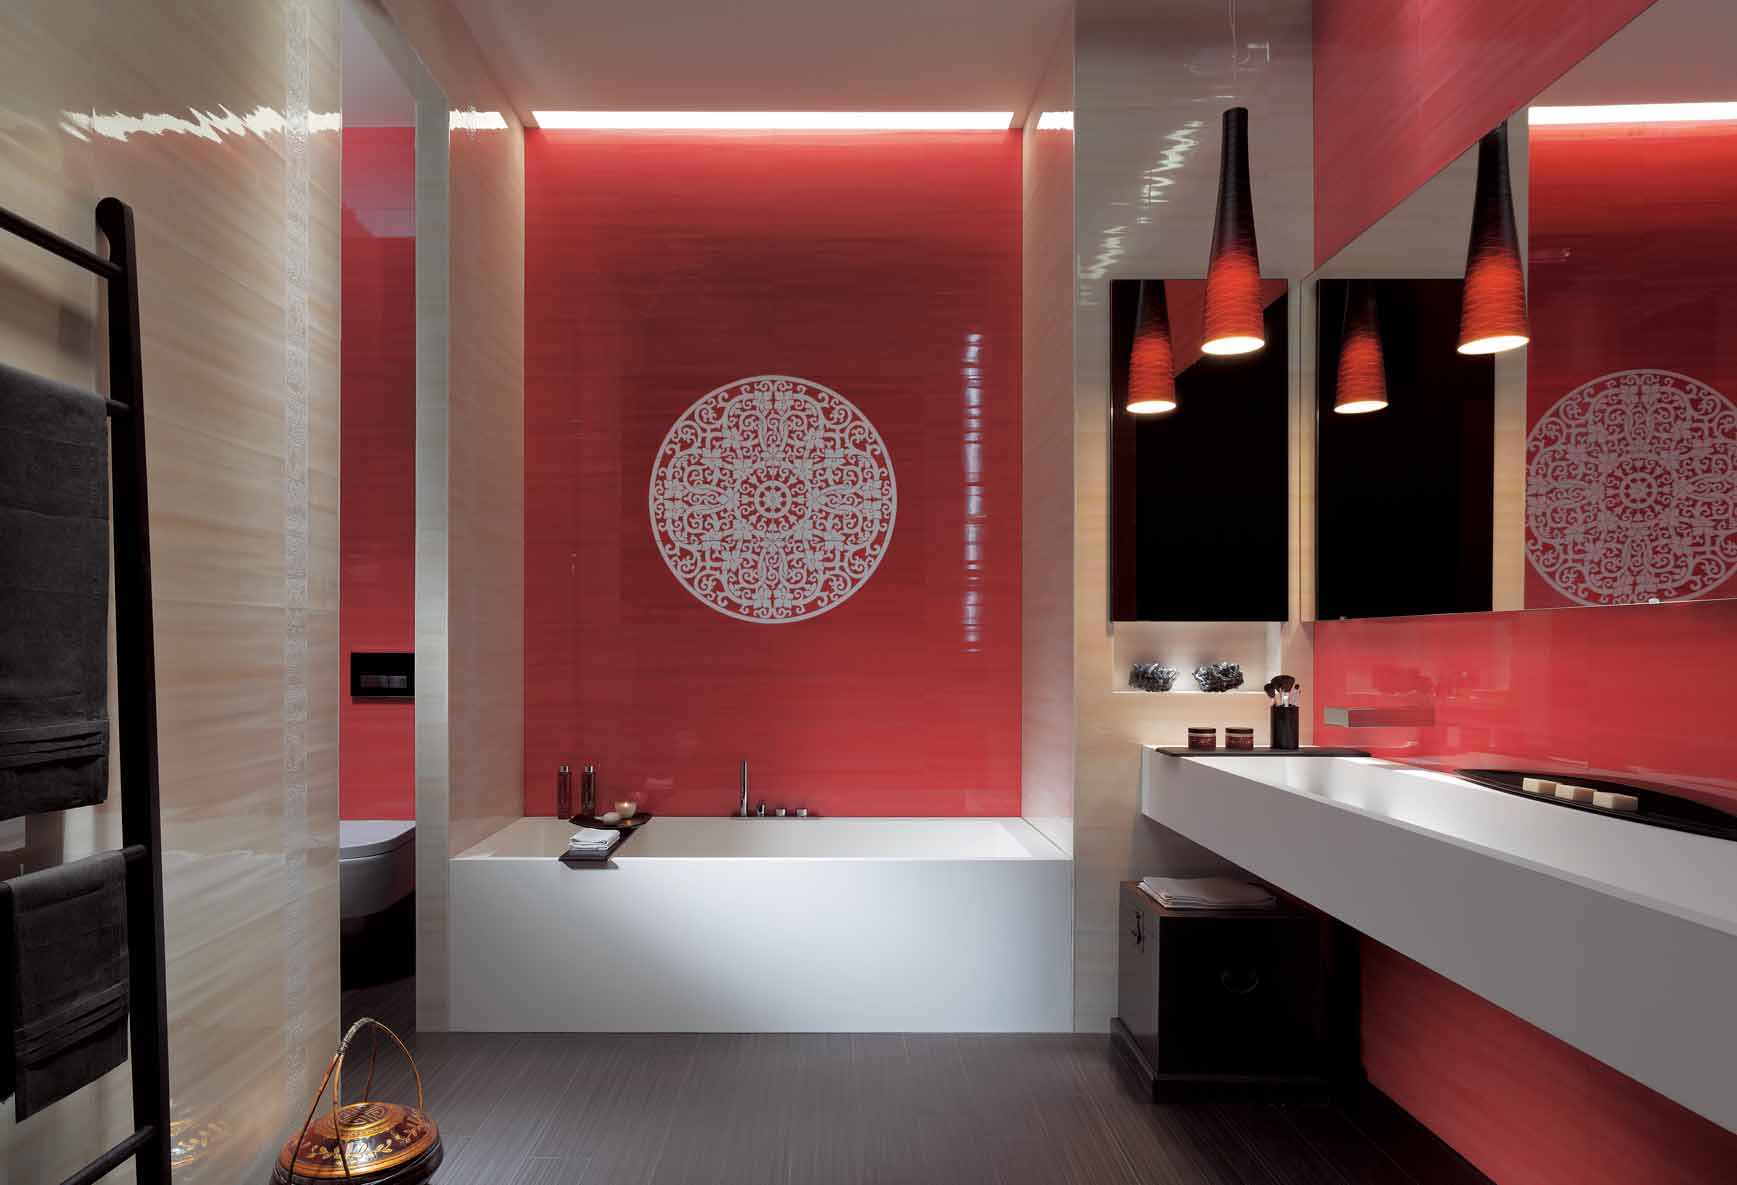 An example of a striking style of a tiled bathroom